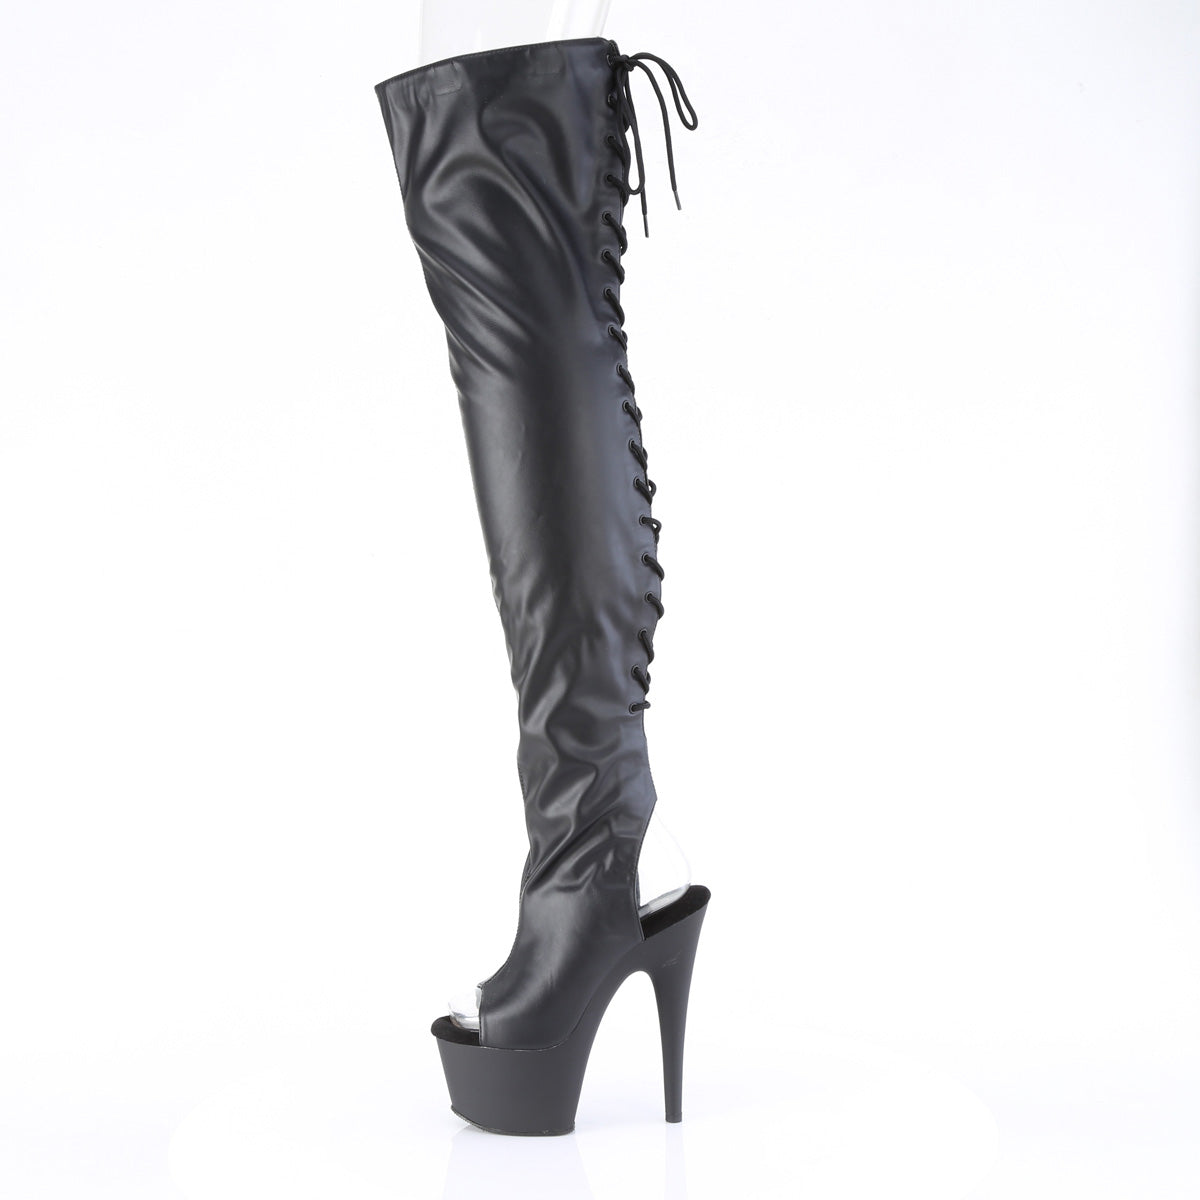 ADORE-3017 Pleaser Black Peep Toe Fetish Pole Dancing Thigh High Boots